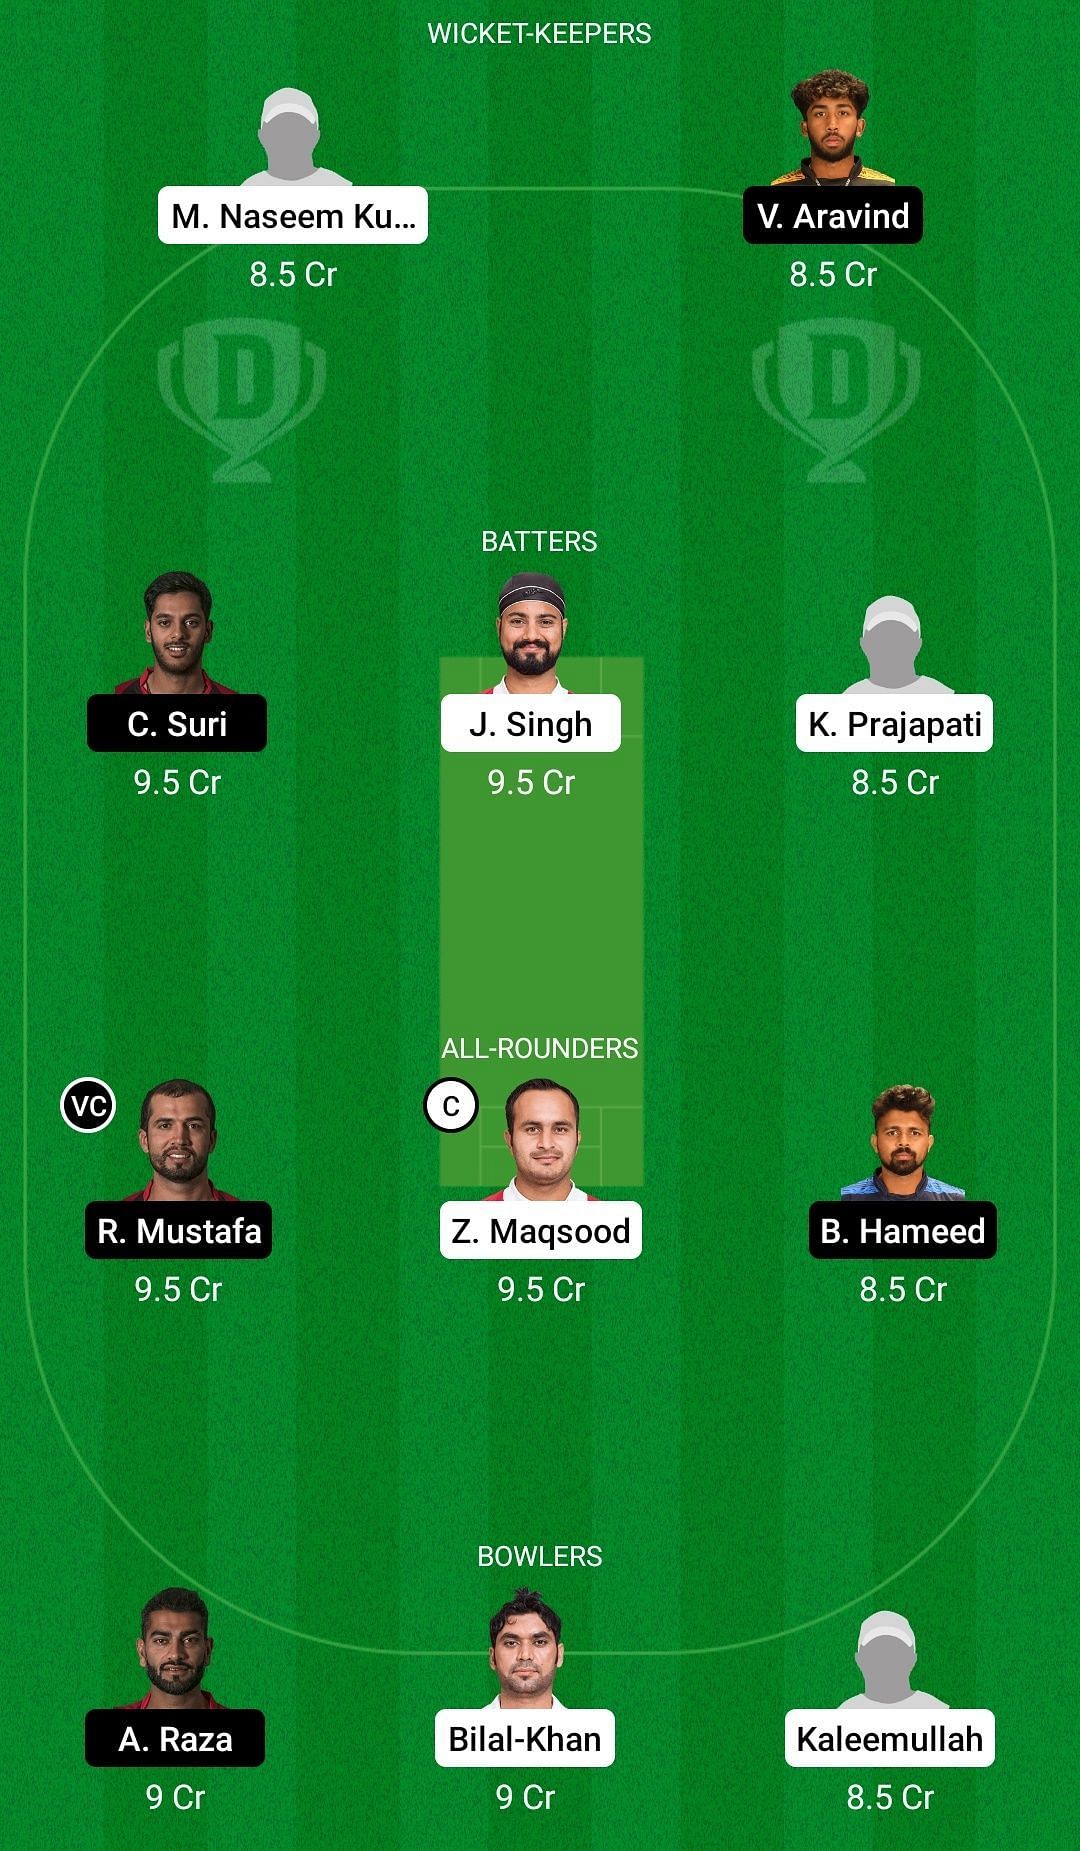 Enter captionEnter captionEnter captionEnter captionDream11 Team for Oman vs United Arab Emirates - ICC Cricket World Cup League Two 2019-23 Match 3.